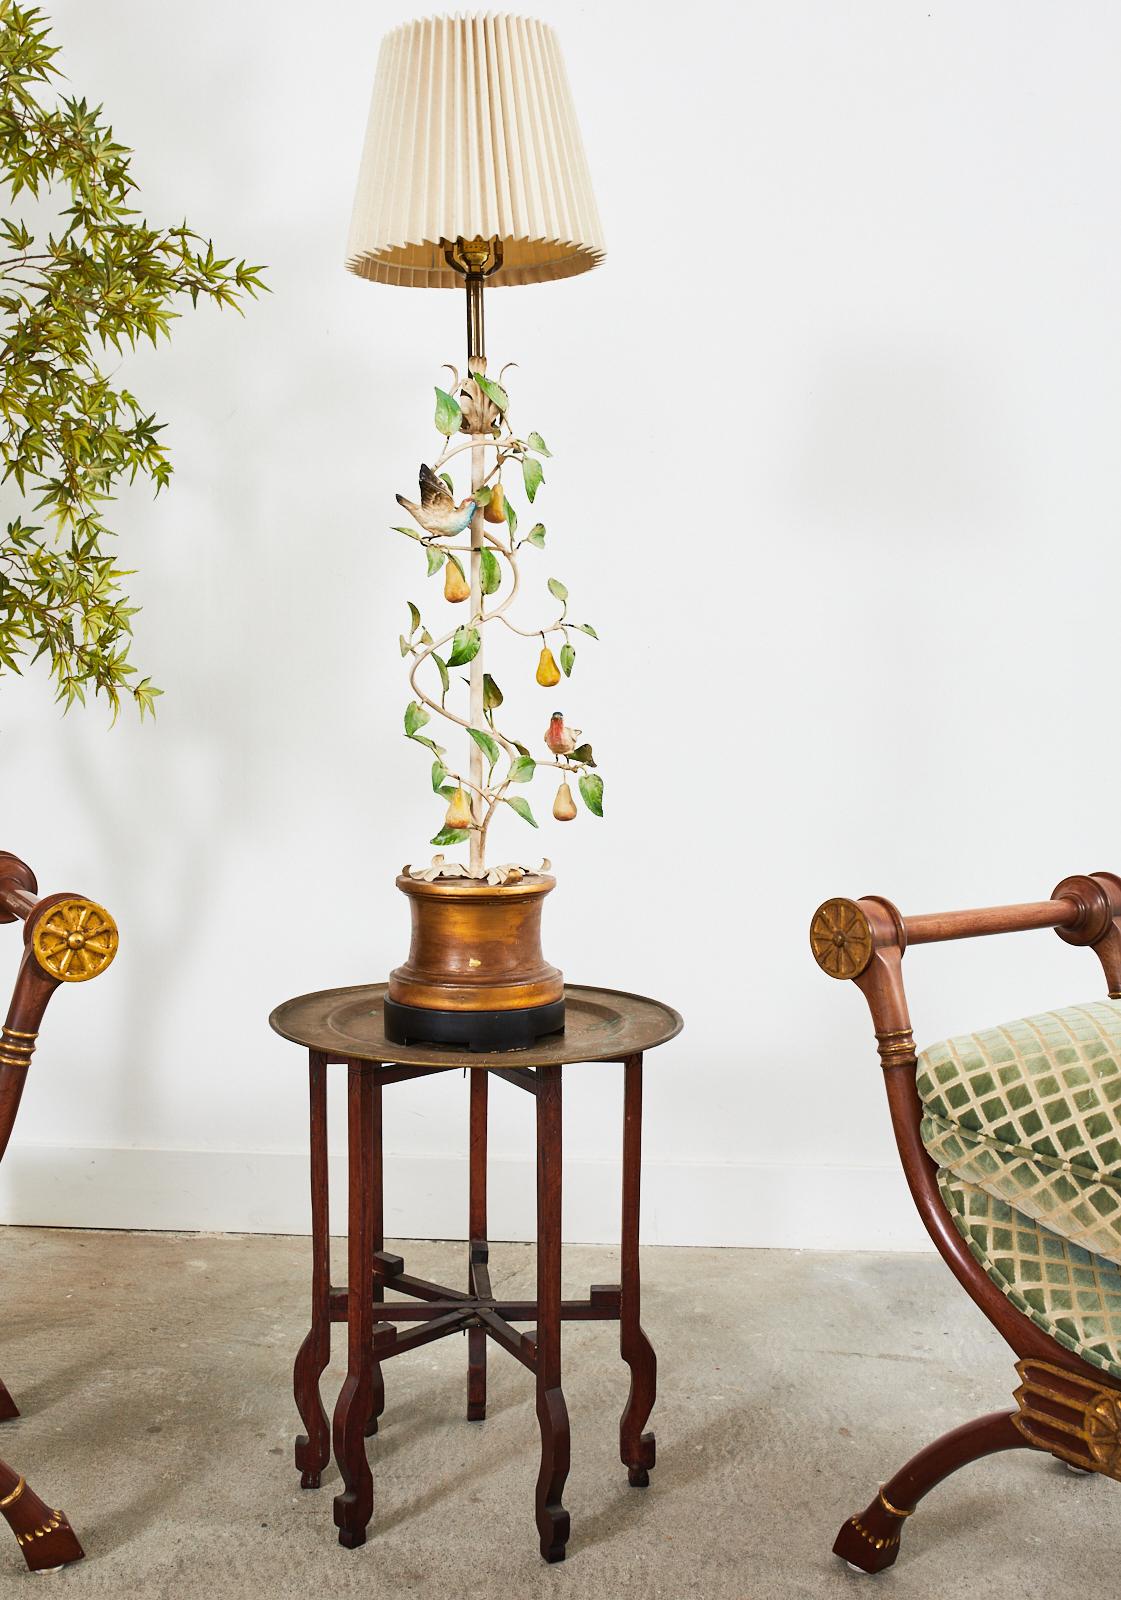 Ornate mid-century modern table lamp designed by Leonard Foss in California. The charming lamp features a column of twisting pear tree vines with delicate birds and foliate. Crafted from tole and beautifully painted. The column is decorated with